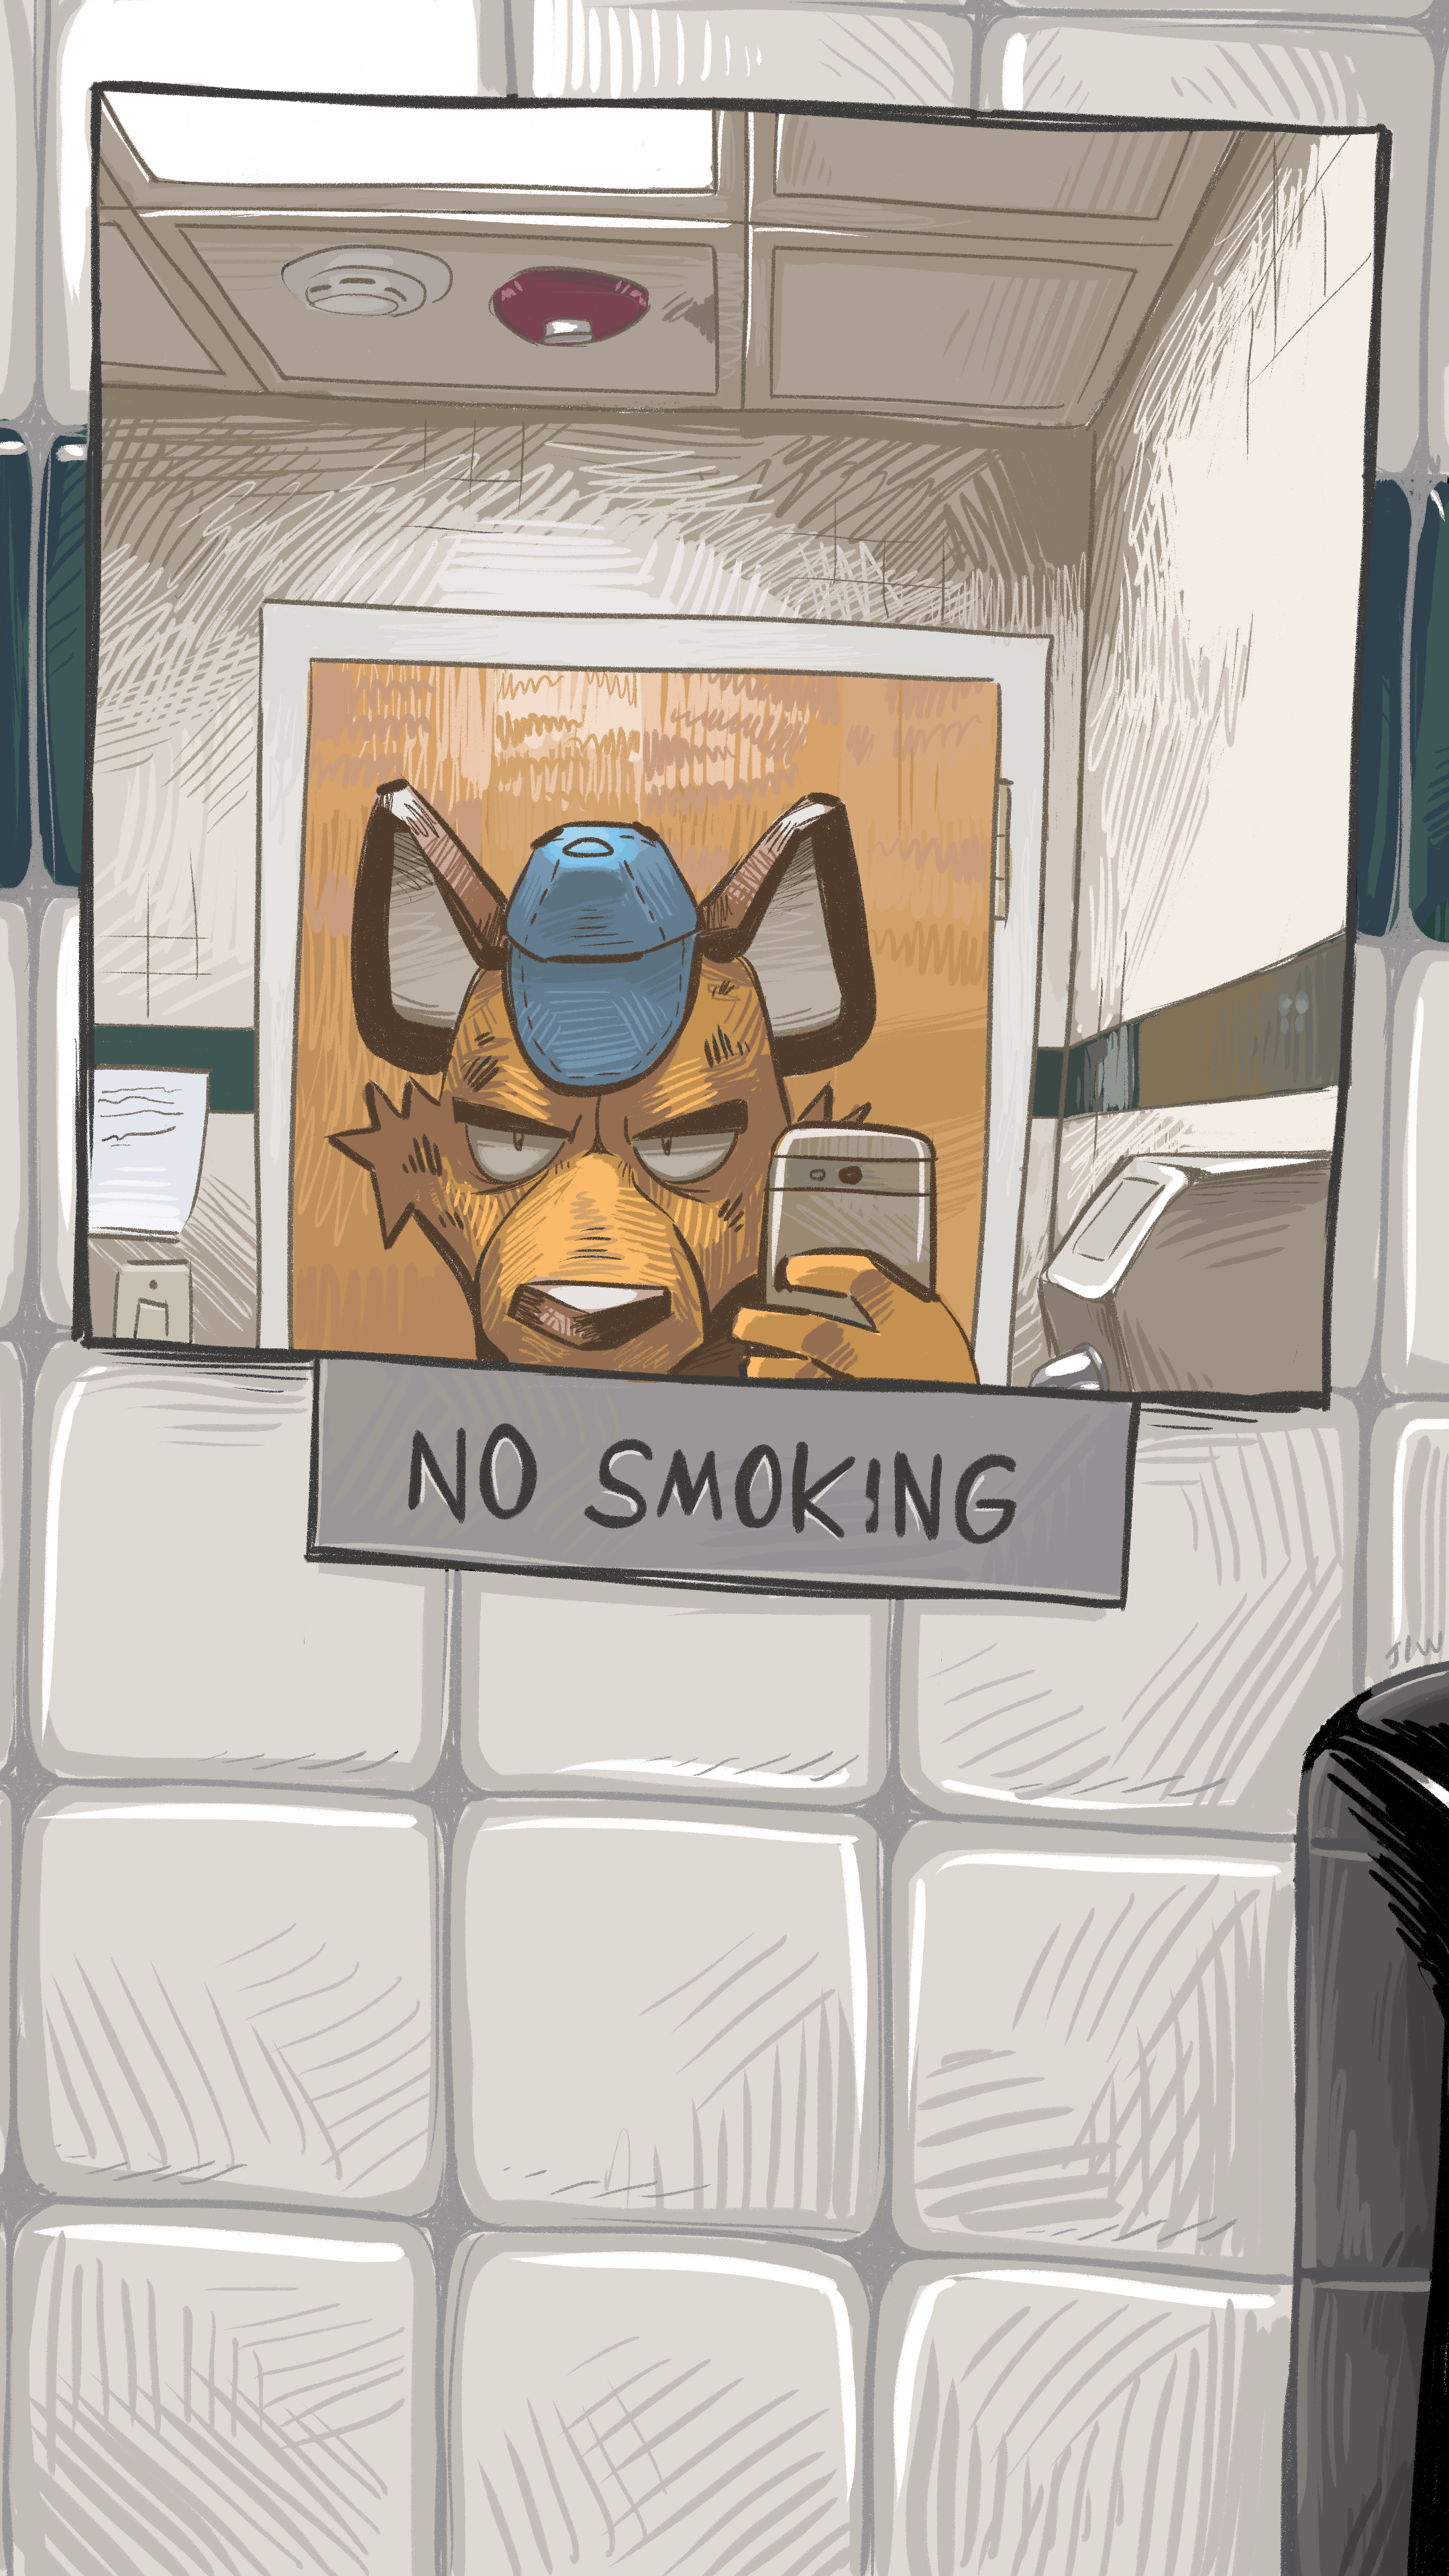 Digital illustration of a hyena angrily taking a selfie in a small mirror